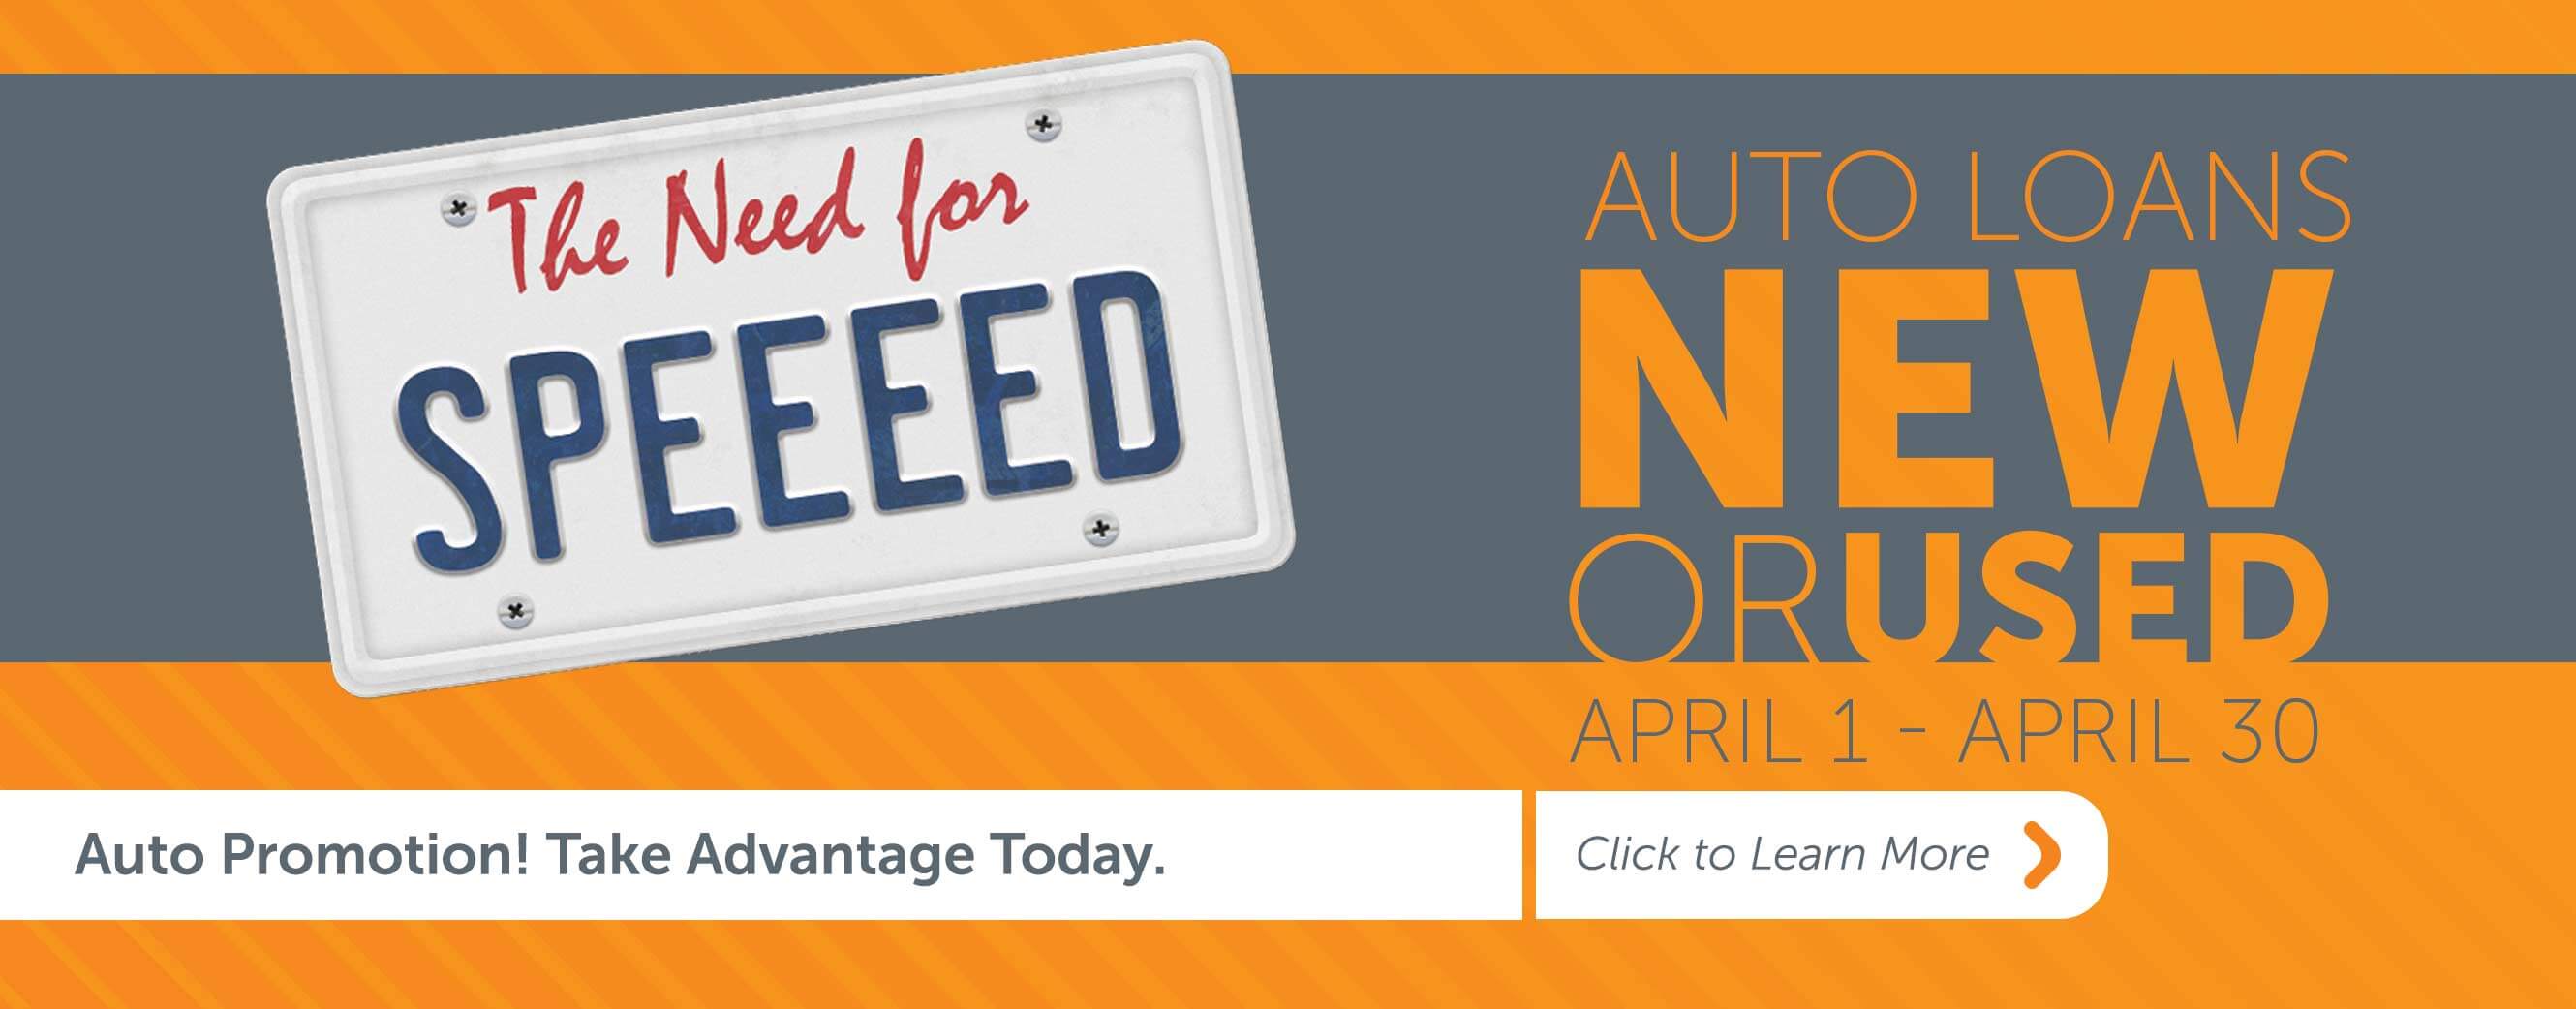 Auto Promotion! Take Advantage today! Click to learn more